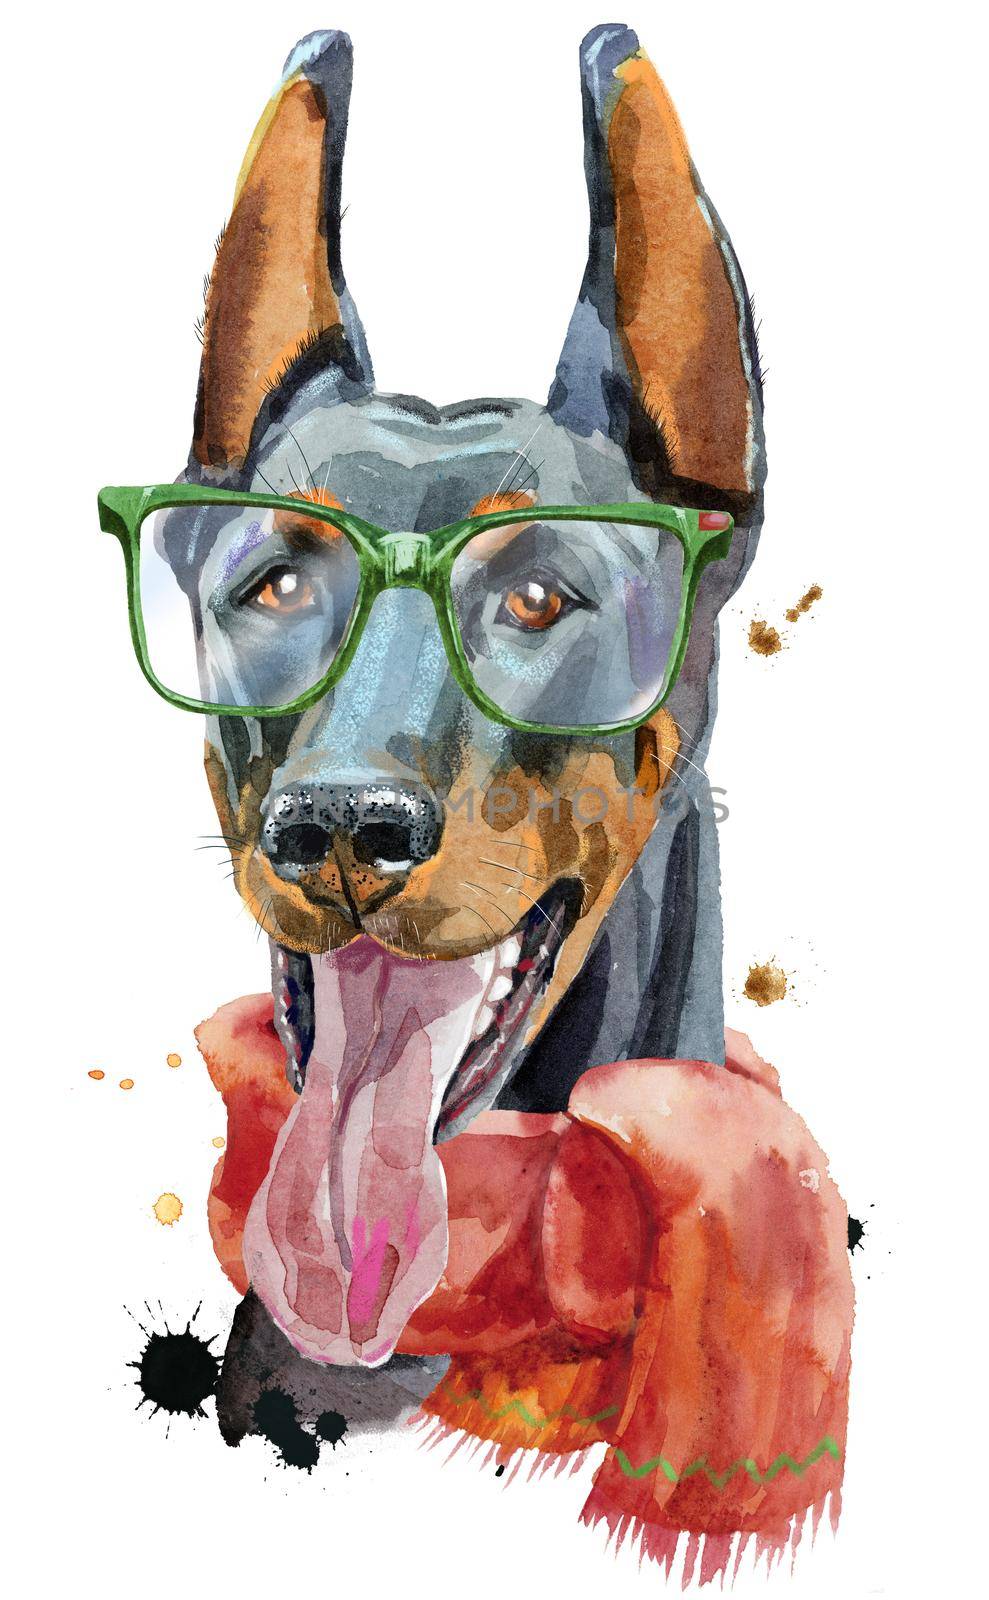 Cute Dog. Dog T-shirt graphics. watercolor doberman illustration with glasses and red scarf